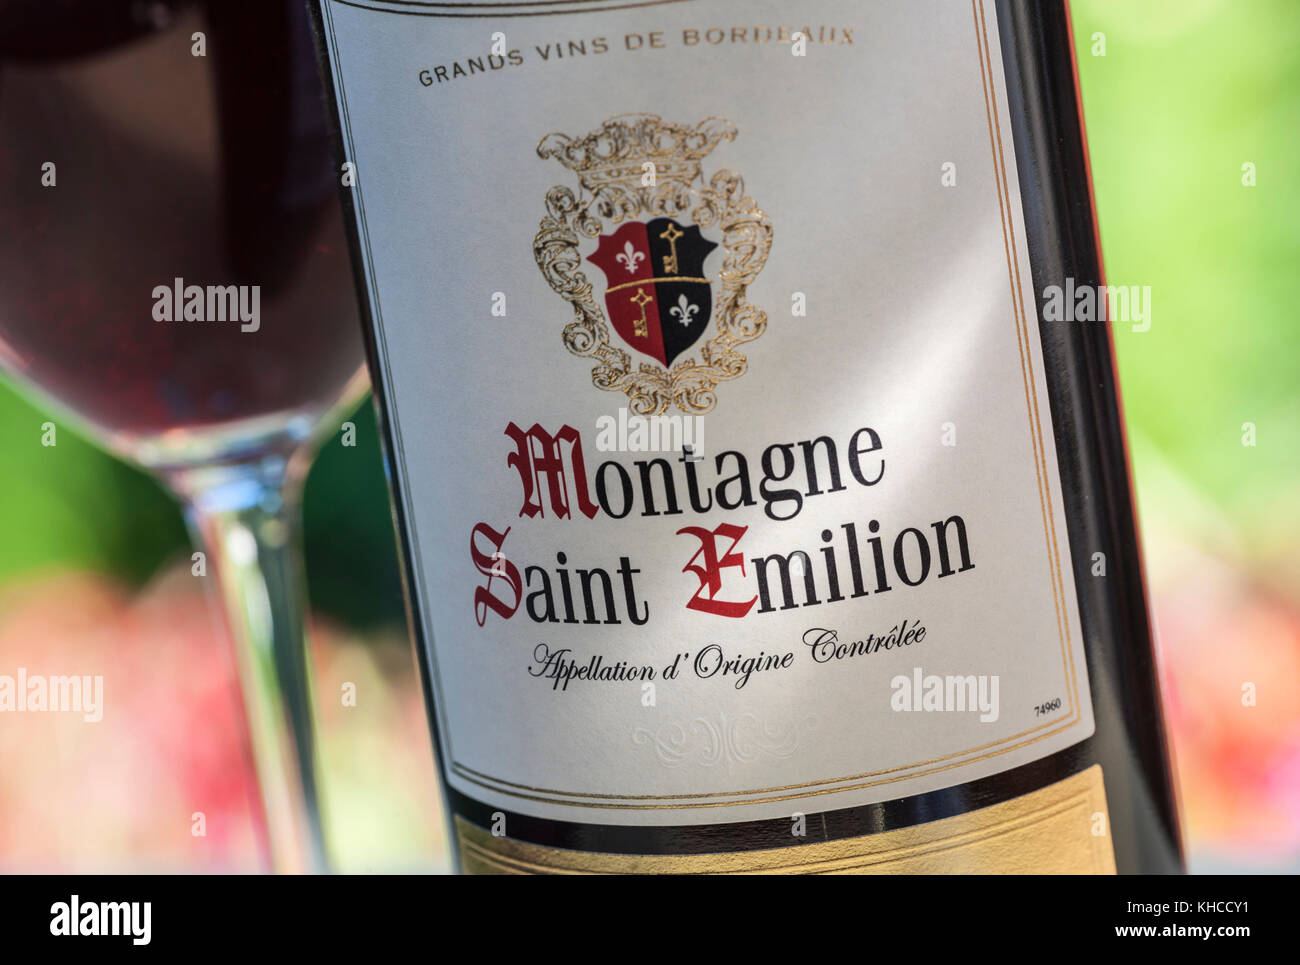 Montagne Saint Emilion sunlit wine bottle label with red wine glass behind in alfresco floral wine tasting situation Stock Photo